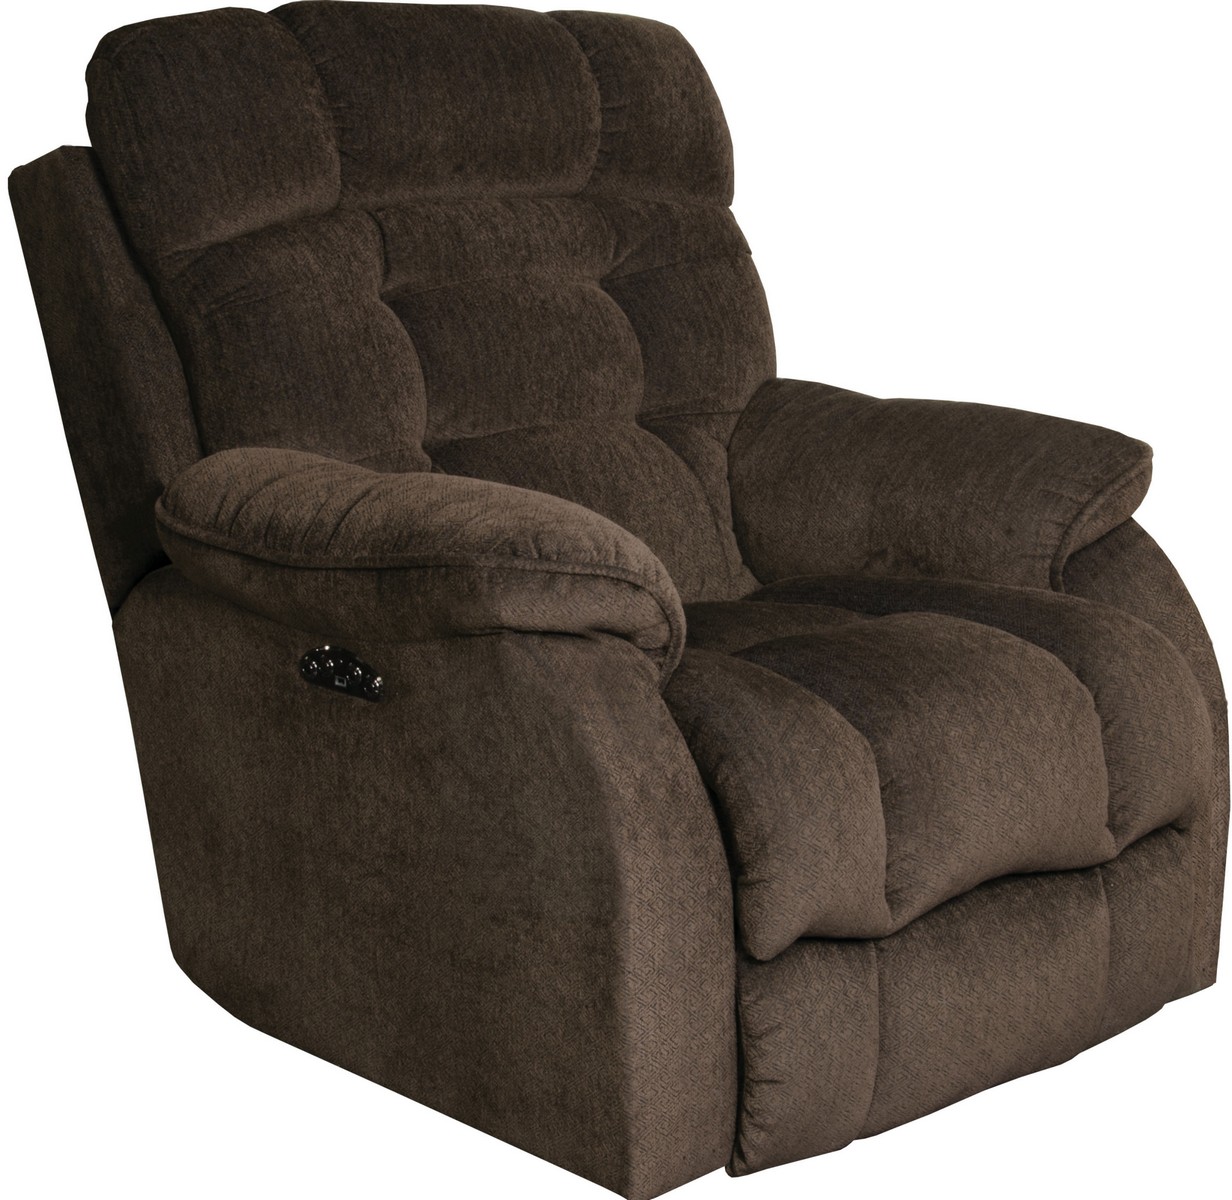 CatNapper Crowley Power Lay Flat Recliner With Power Headrest - Espresso